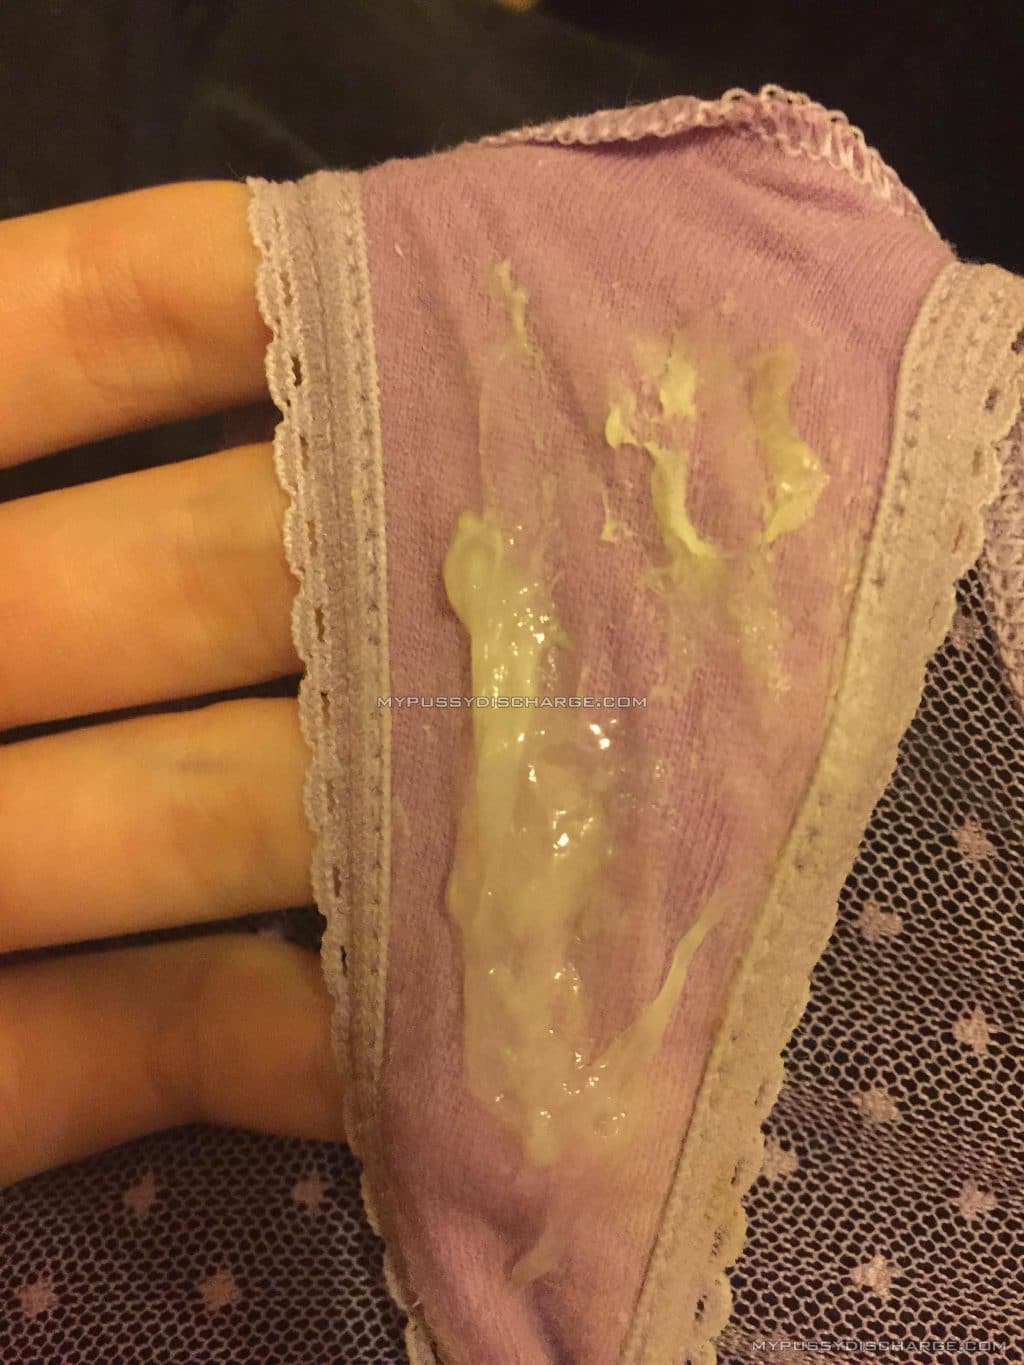 Sticky cervical mucus on wet panties My Pussy Discharge.